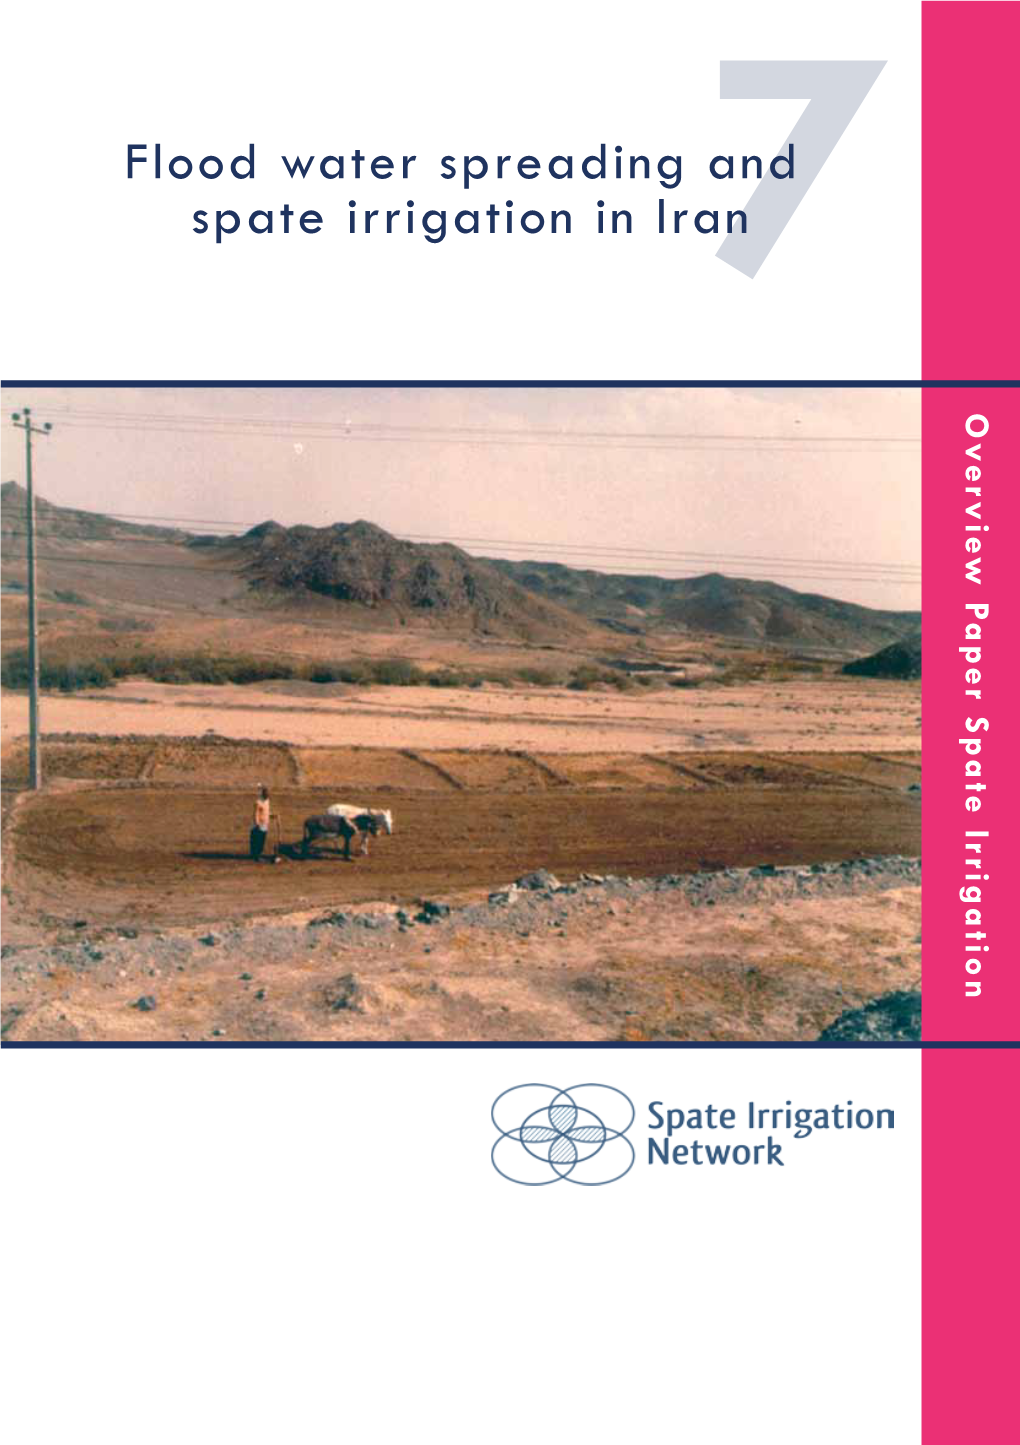 Flood Water Spreading and Spate Irrigation in Iran7 Overview Paper Irrigation Spate ABSTRACT